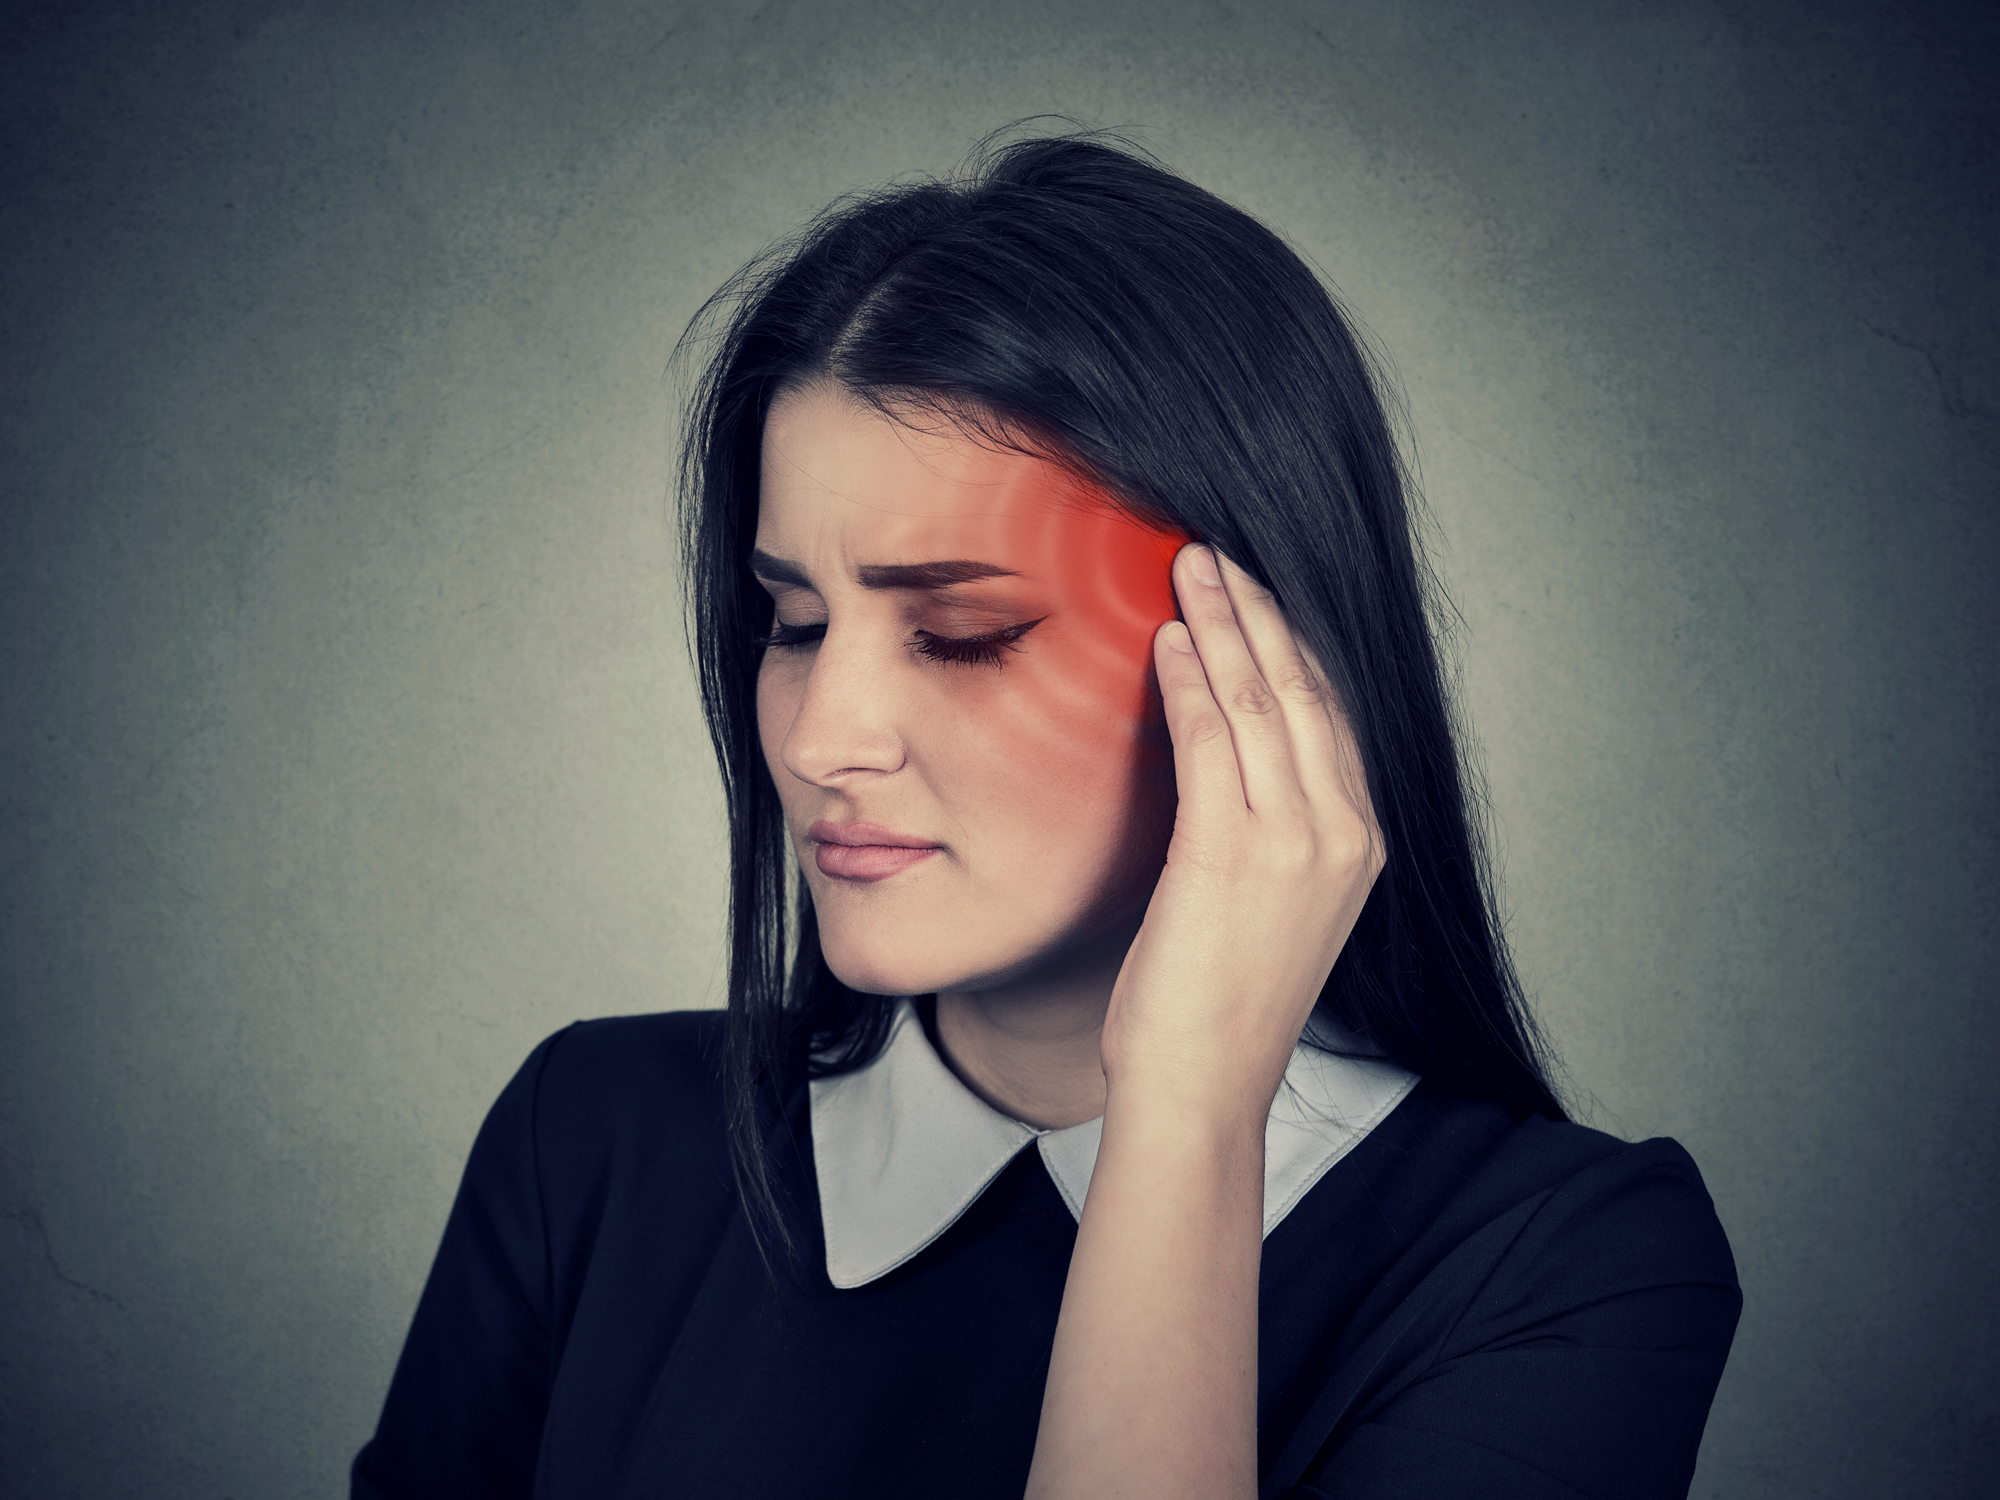 Trigeminal neuralgia: A painful bully that can wreak havoc on your life